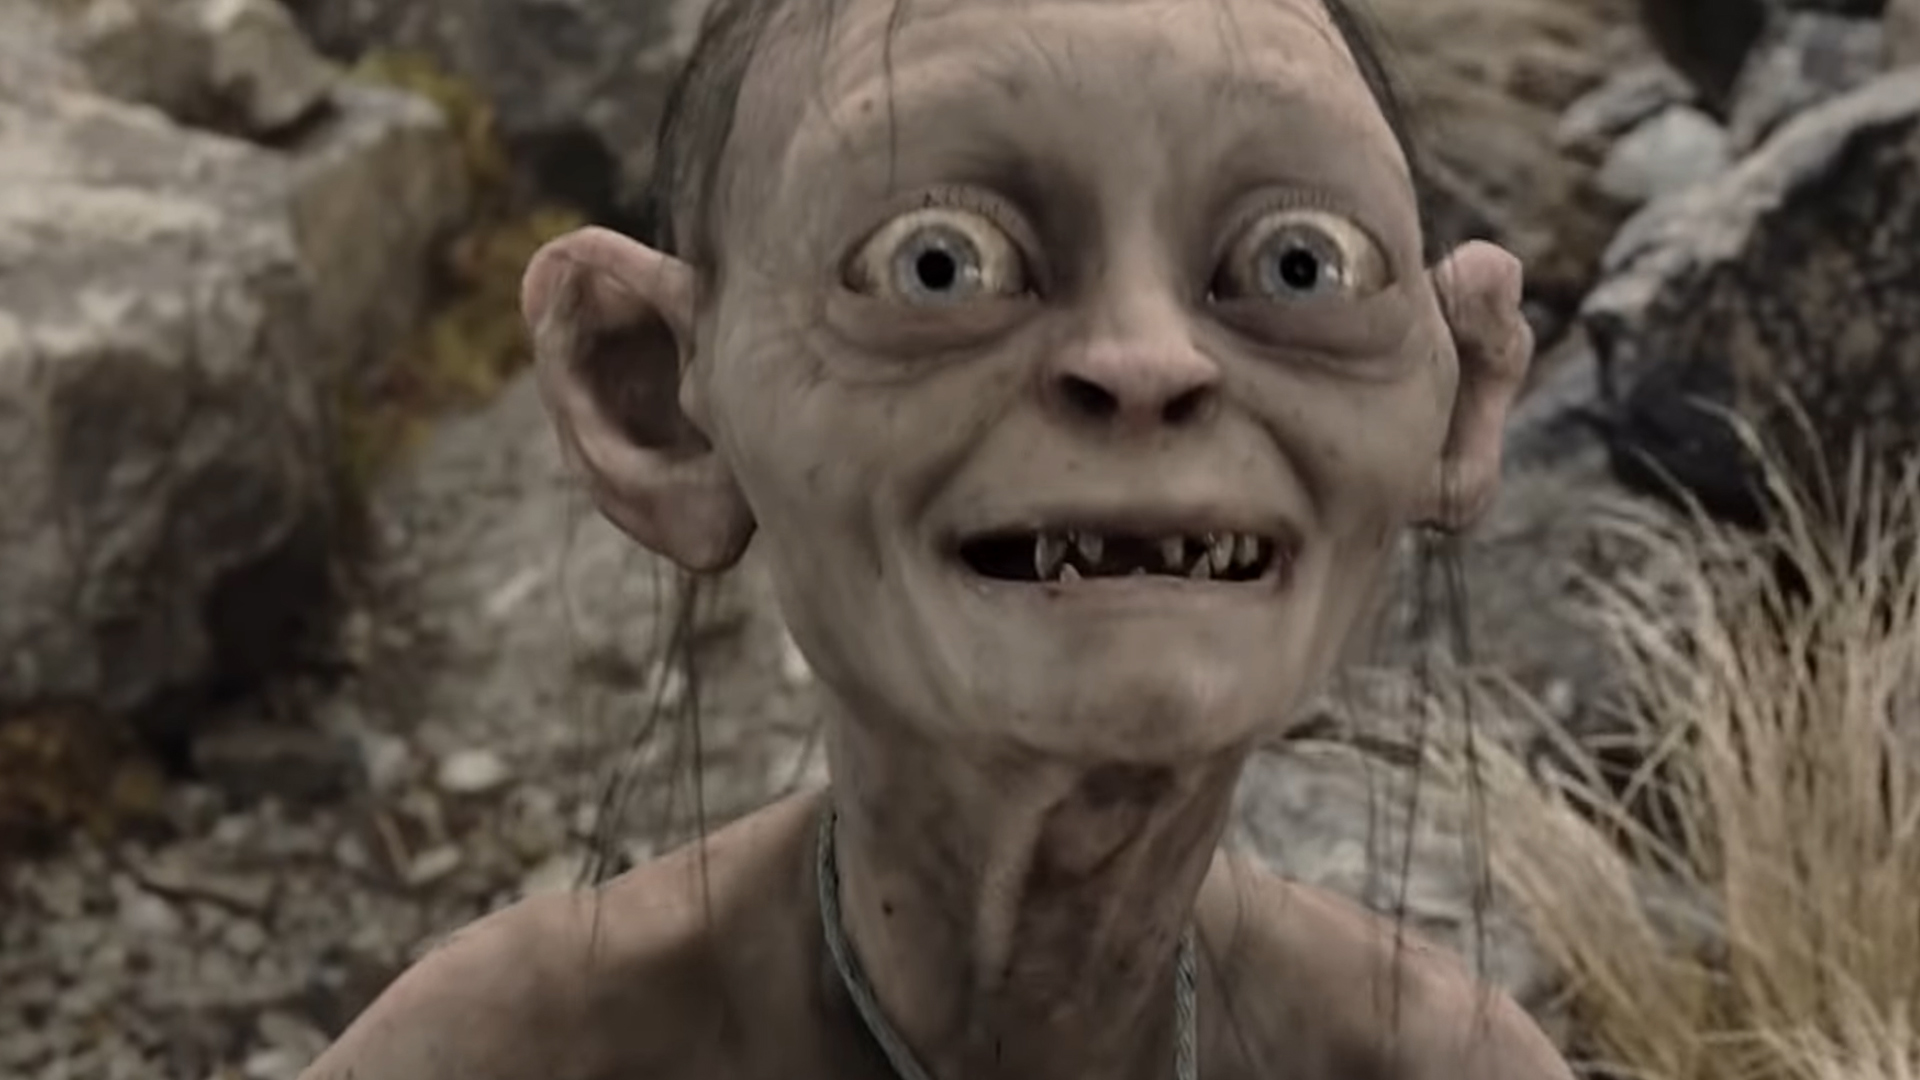 The Lord of the Rings Gollum is a nextgen stealth action prequel